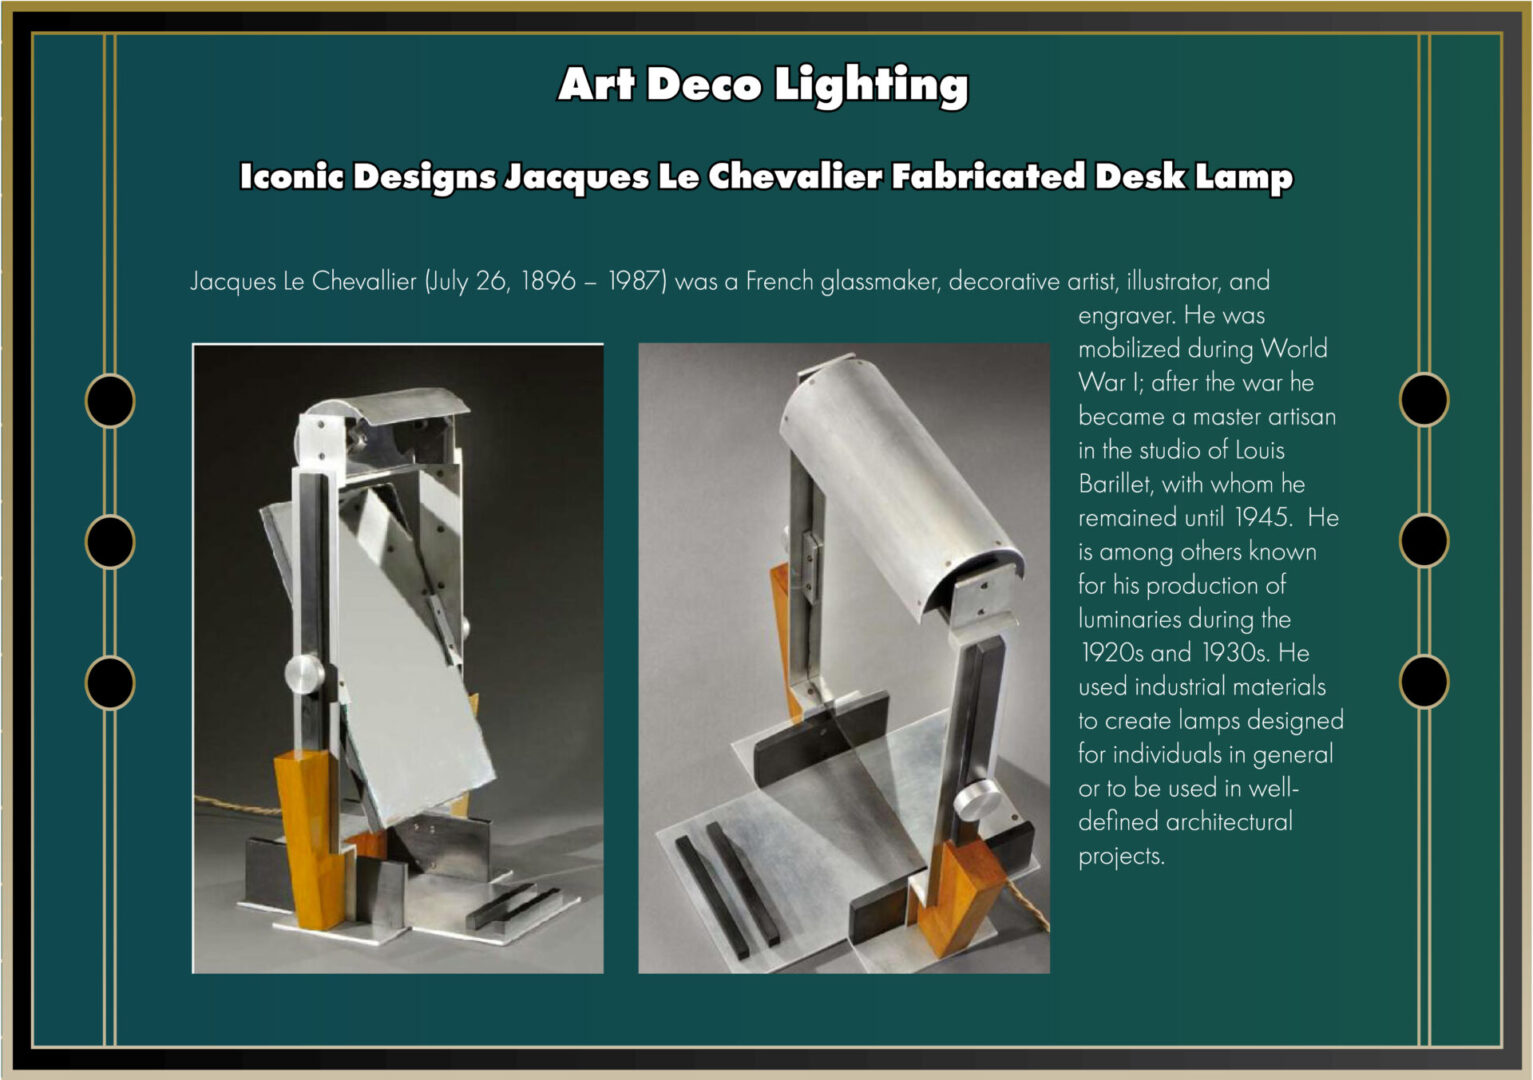 Iconic fabricated Desk Lamp designed by Jacques Le Chevalier